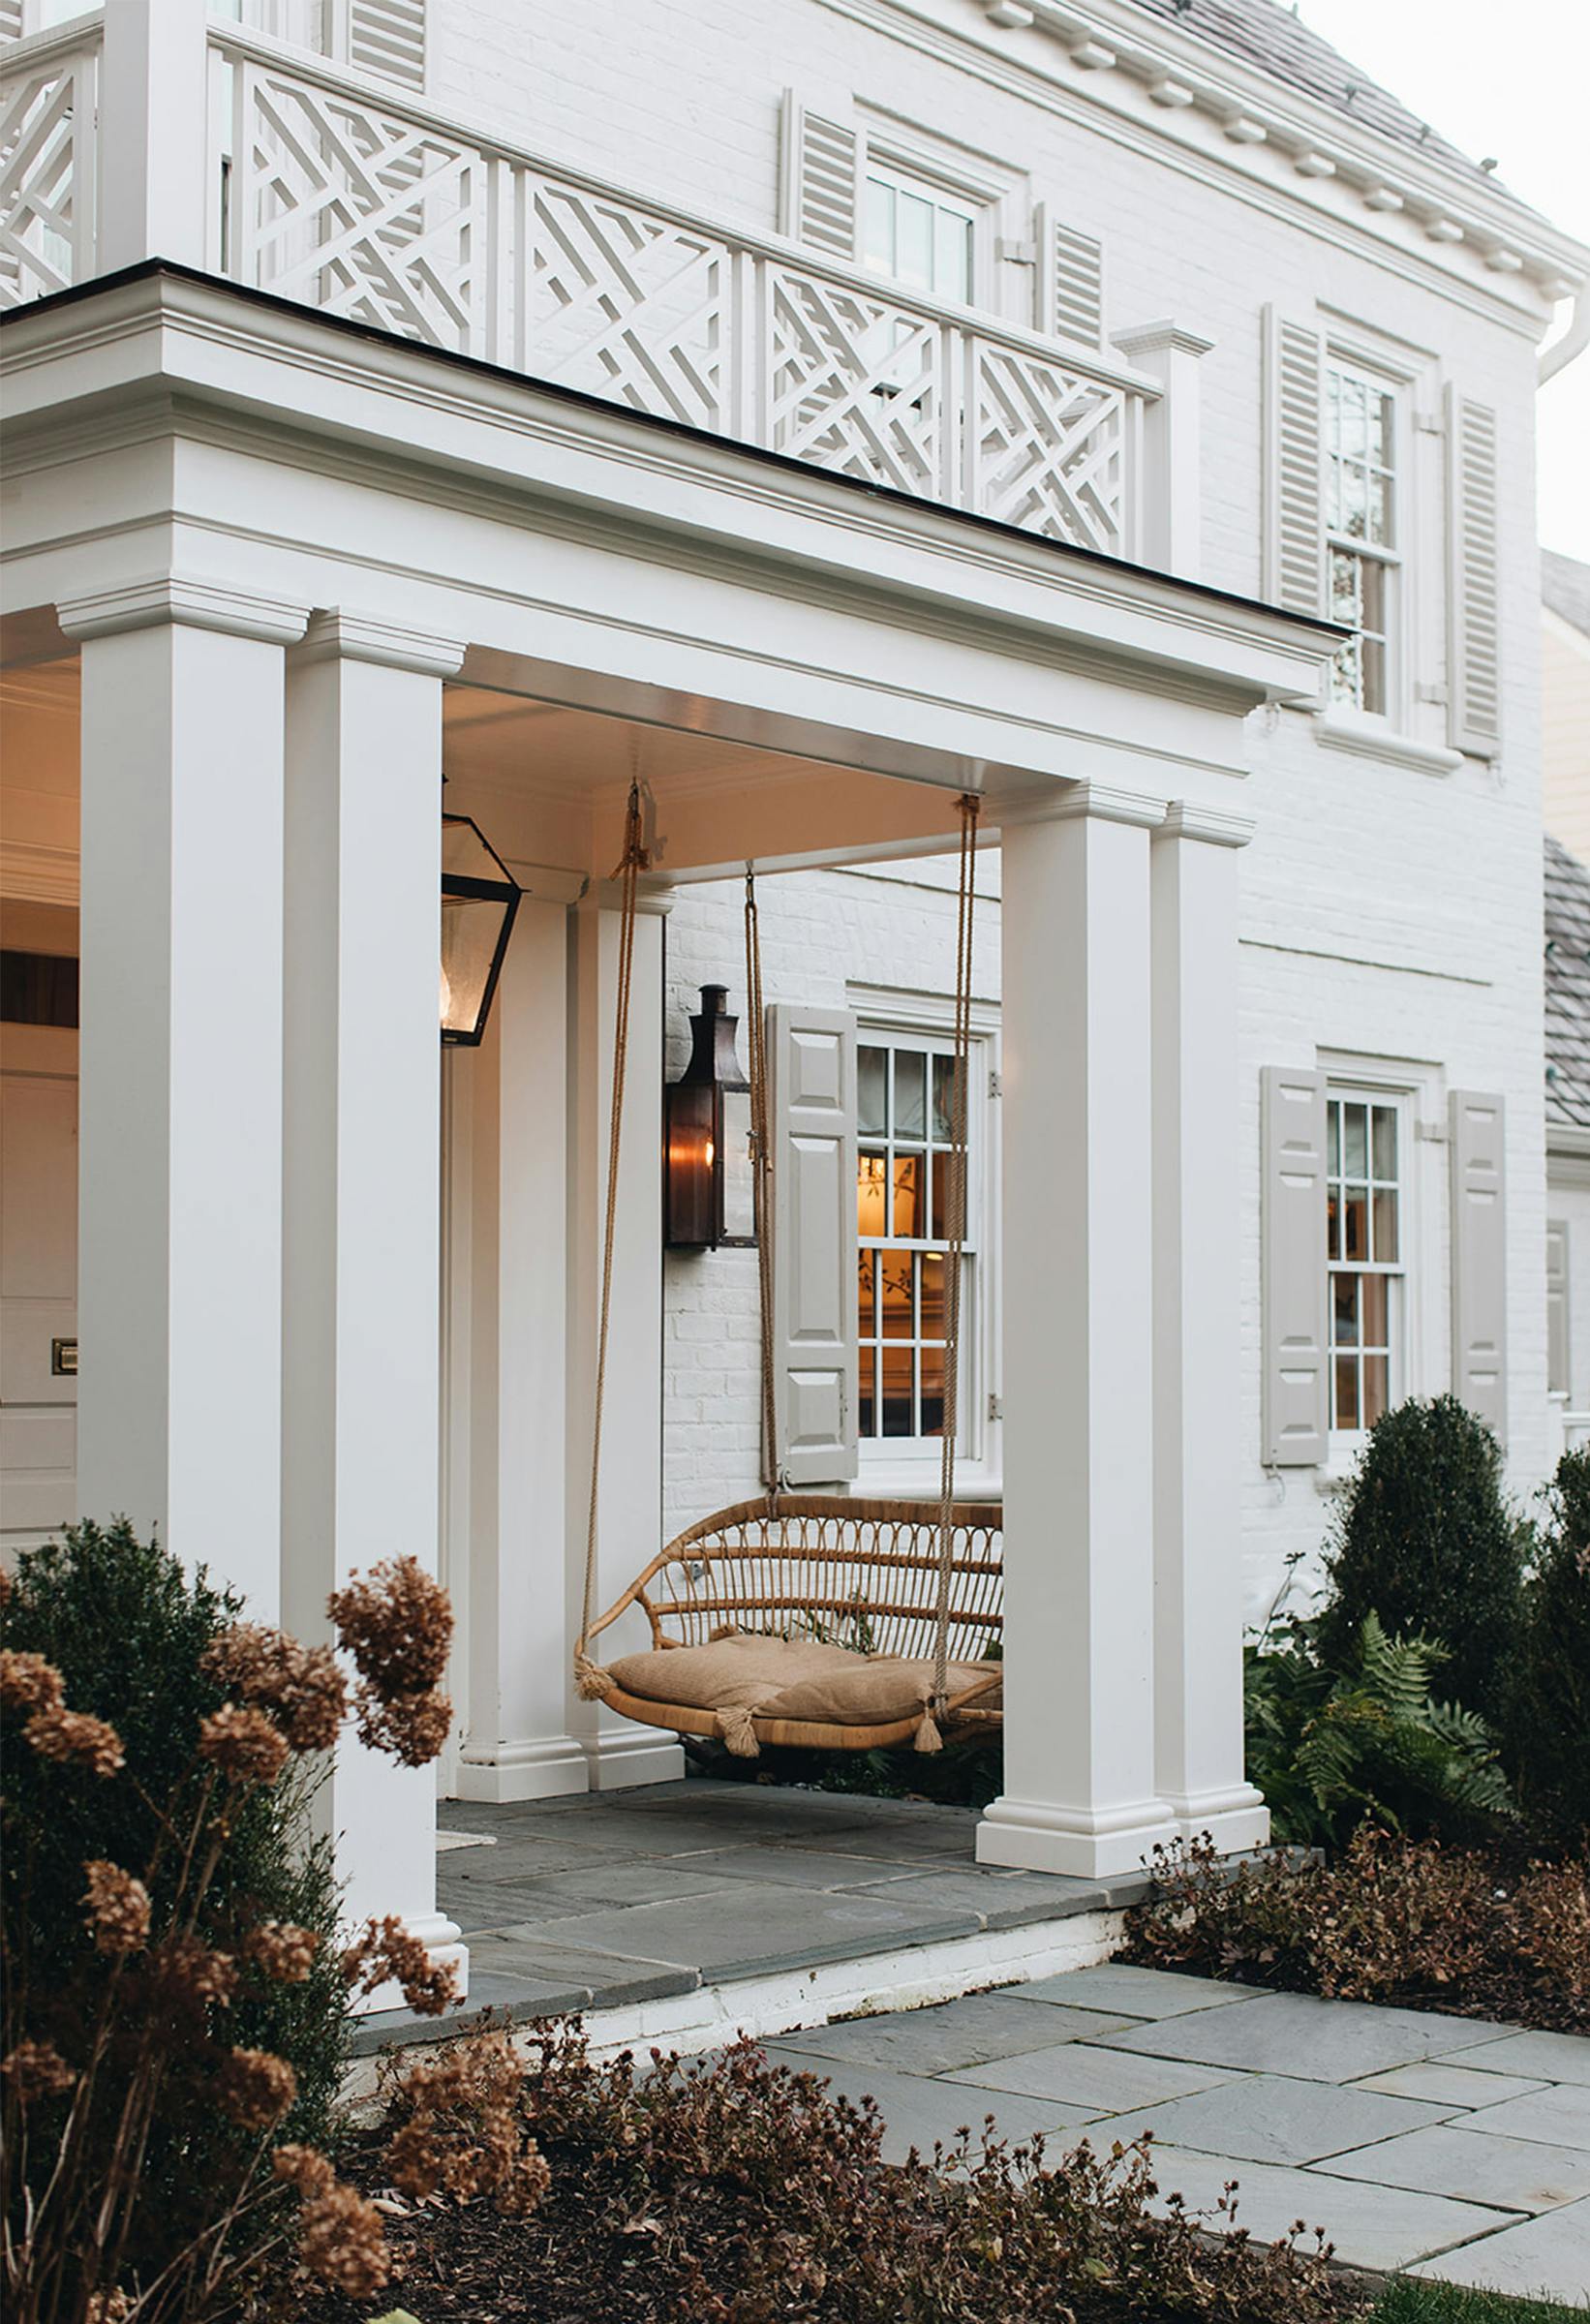 Nicole-Green-Design-Project-Chevy-Chase-Historic-East-Coast-Home-Exterior-Porch-Swing